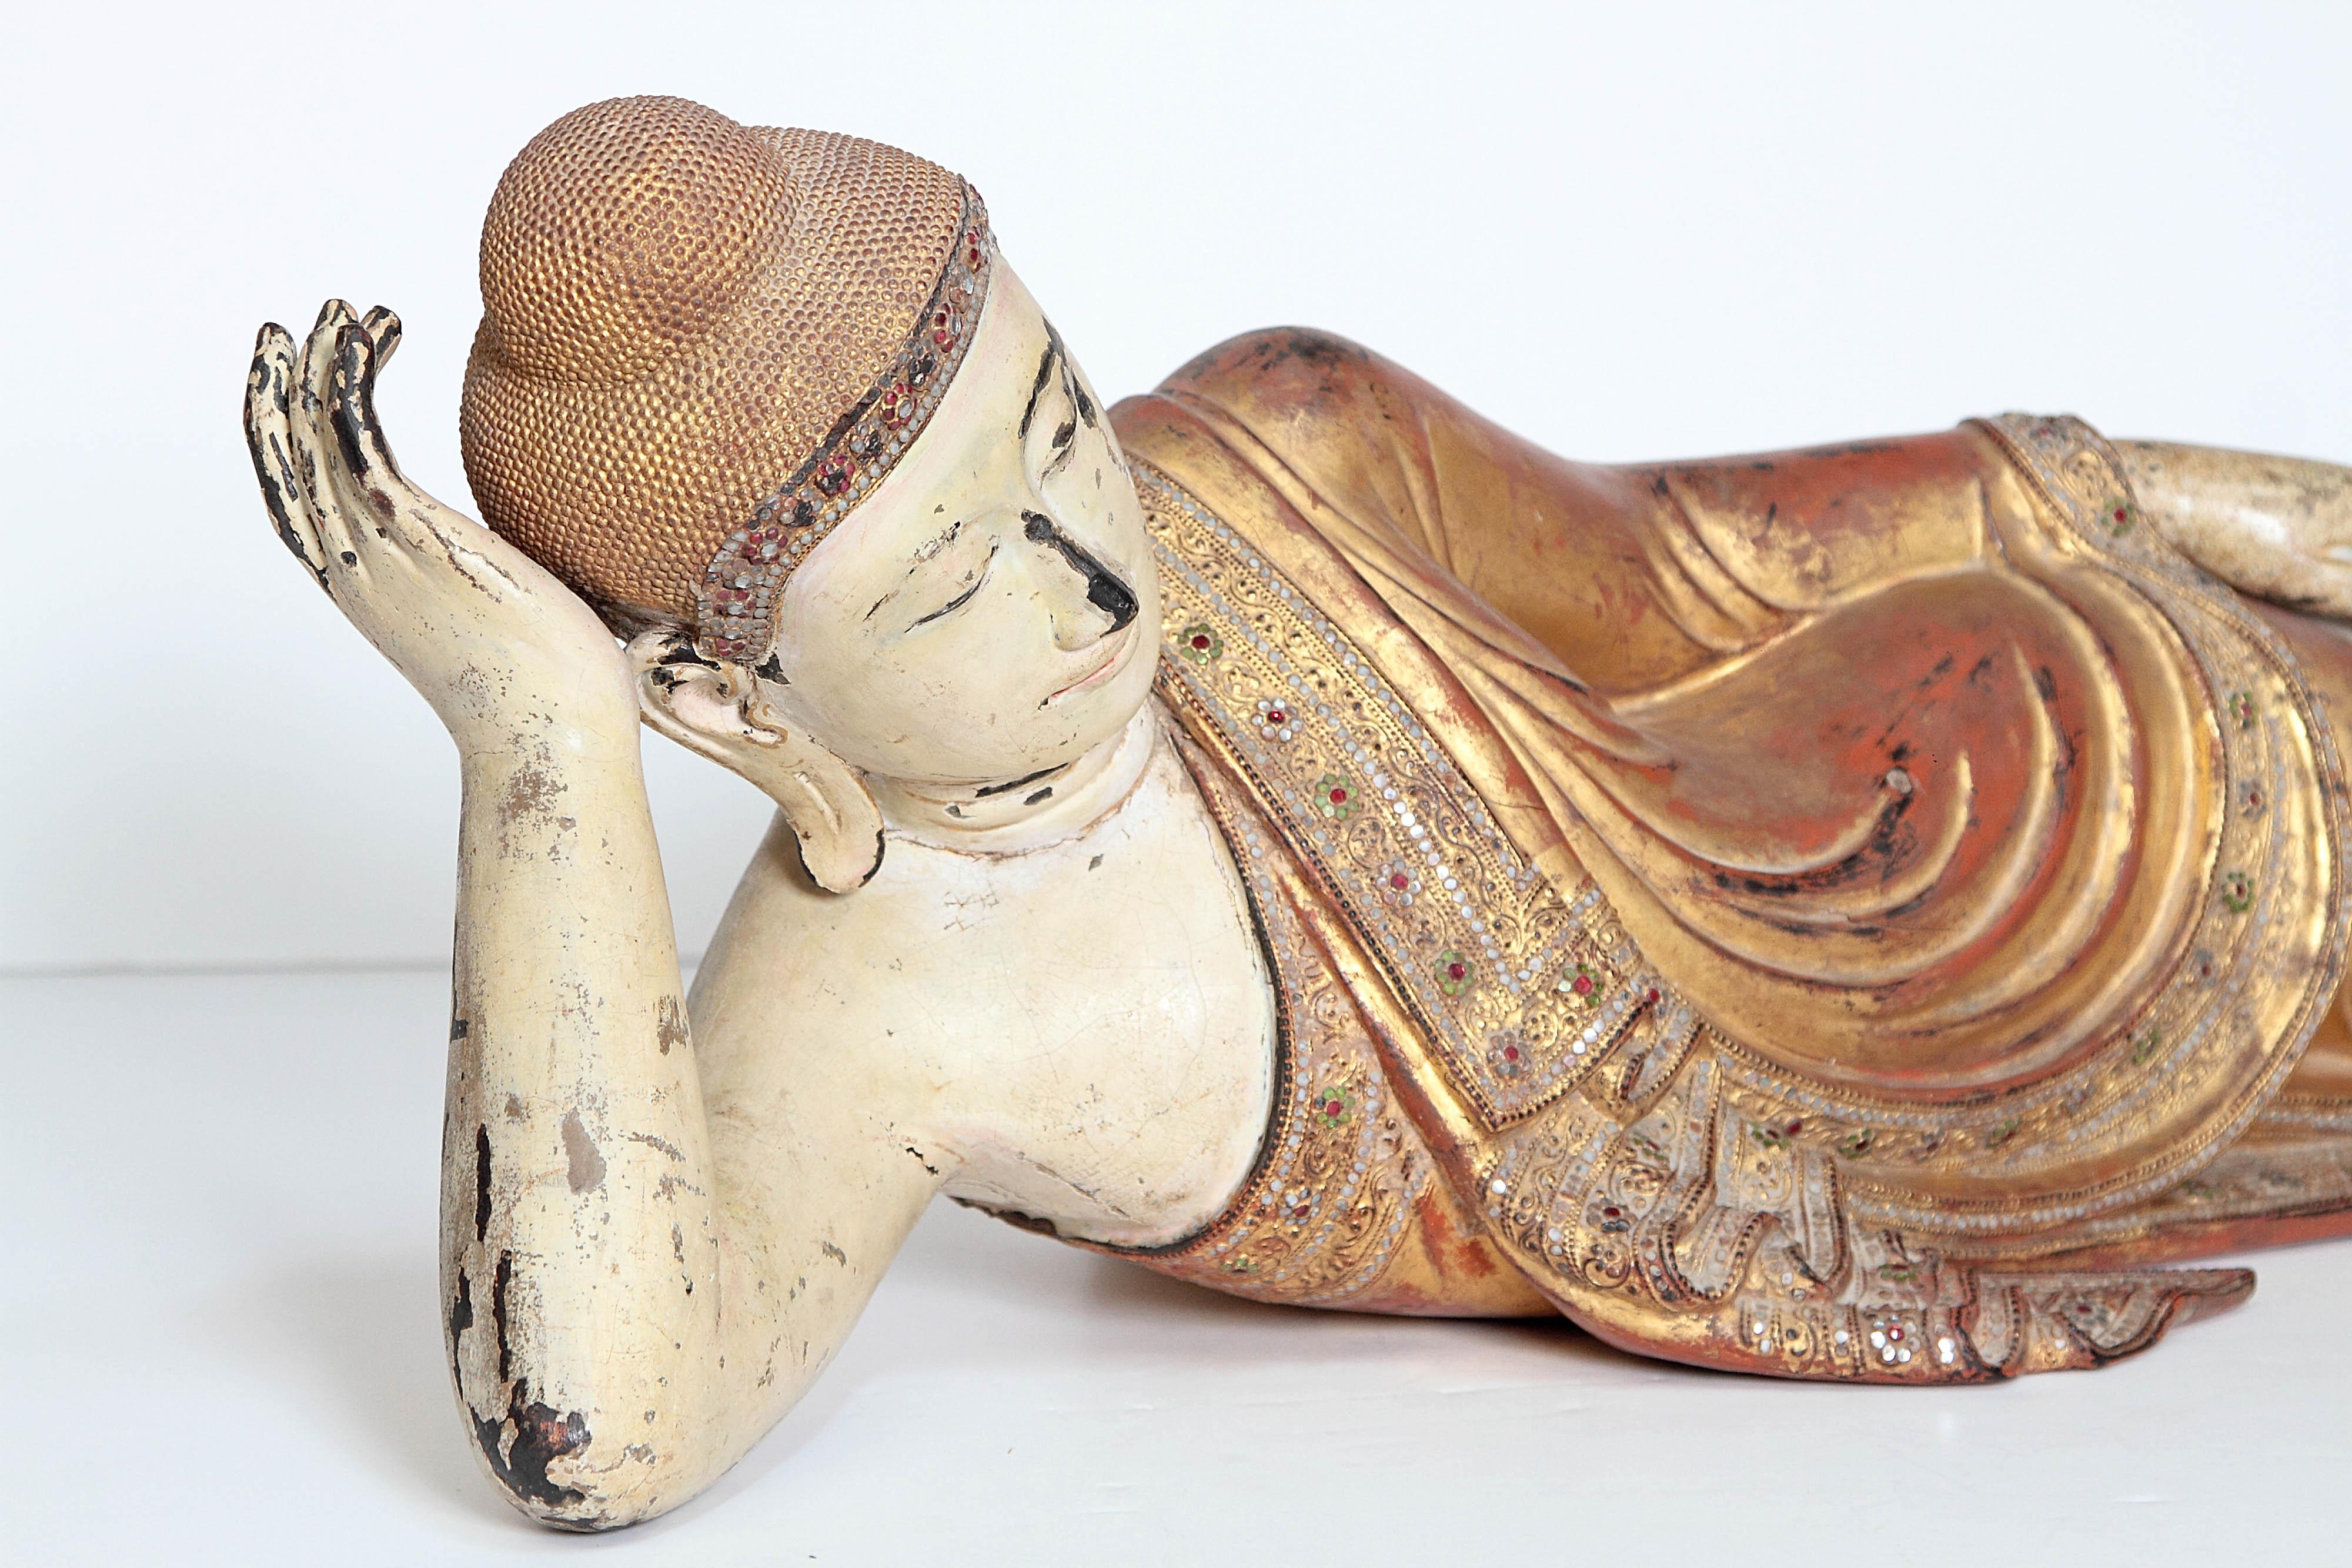 19th Century Reclining Buddha or Draped in Golden Robes with a Jeweled Border and Headress